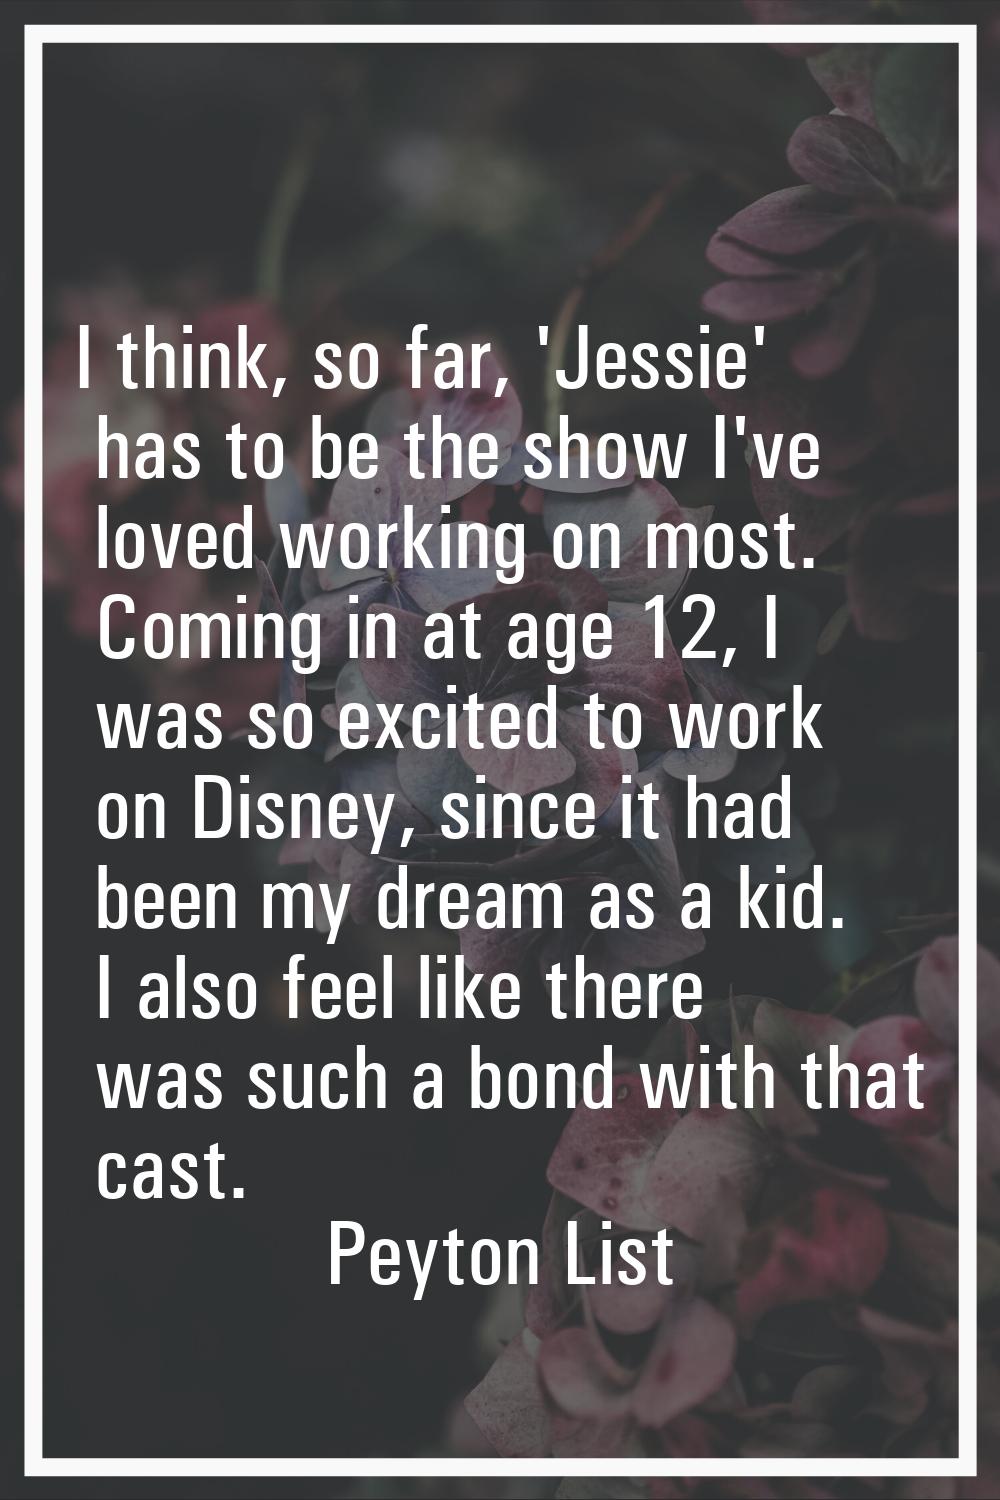 I think, so far, 'Jessie' has to be the show I've loved working on most. Coming in at age 12, I was